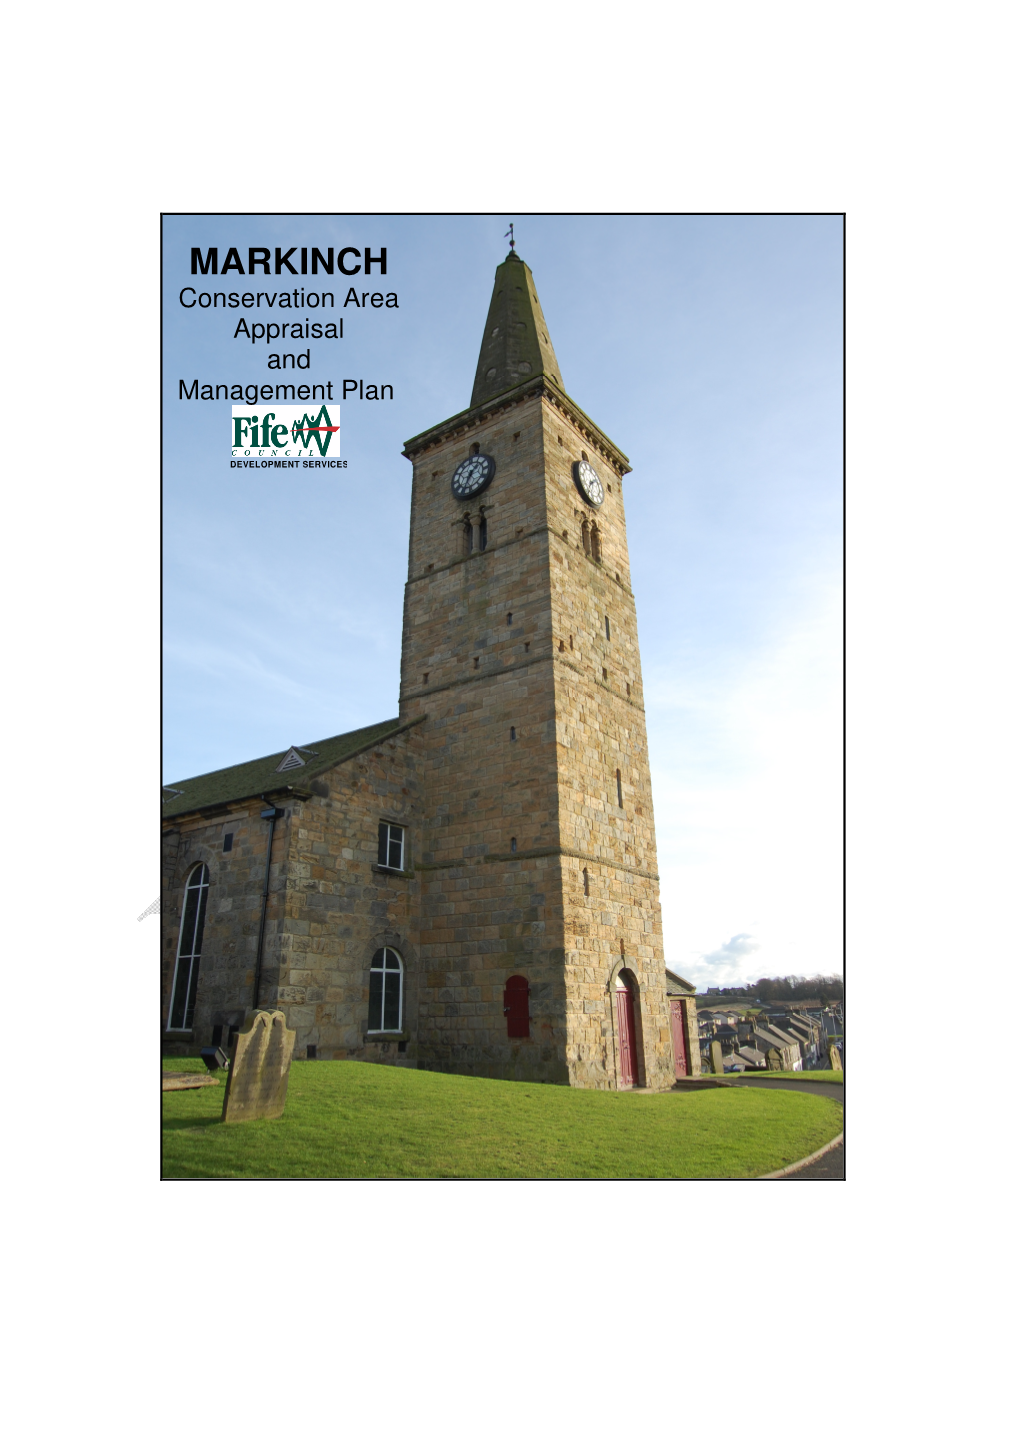 MARKINCH Conservation Area Appraisal and Management Plan